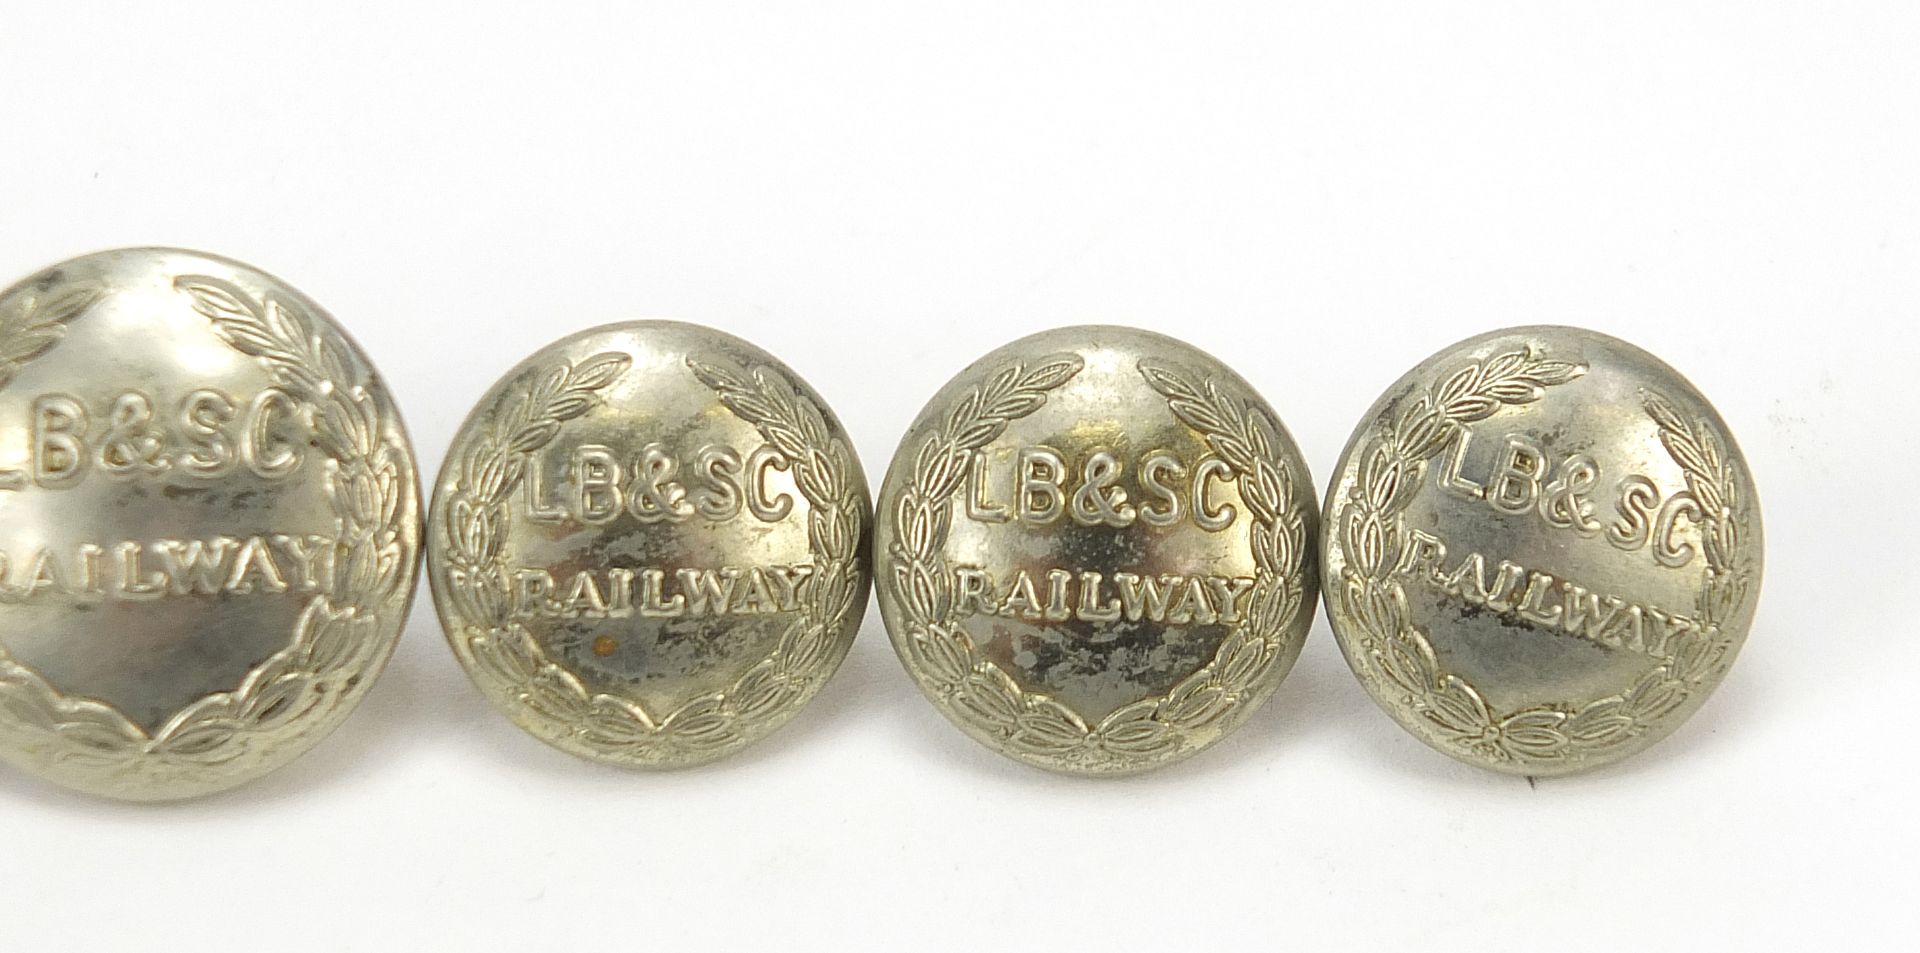 Six London Brighton And South Coast Railway buttons - Image 3 of 4